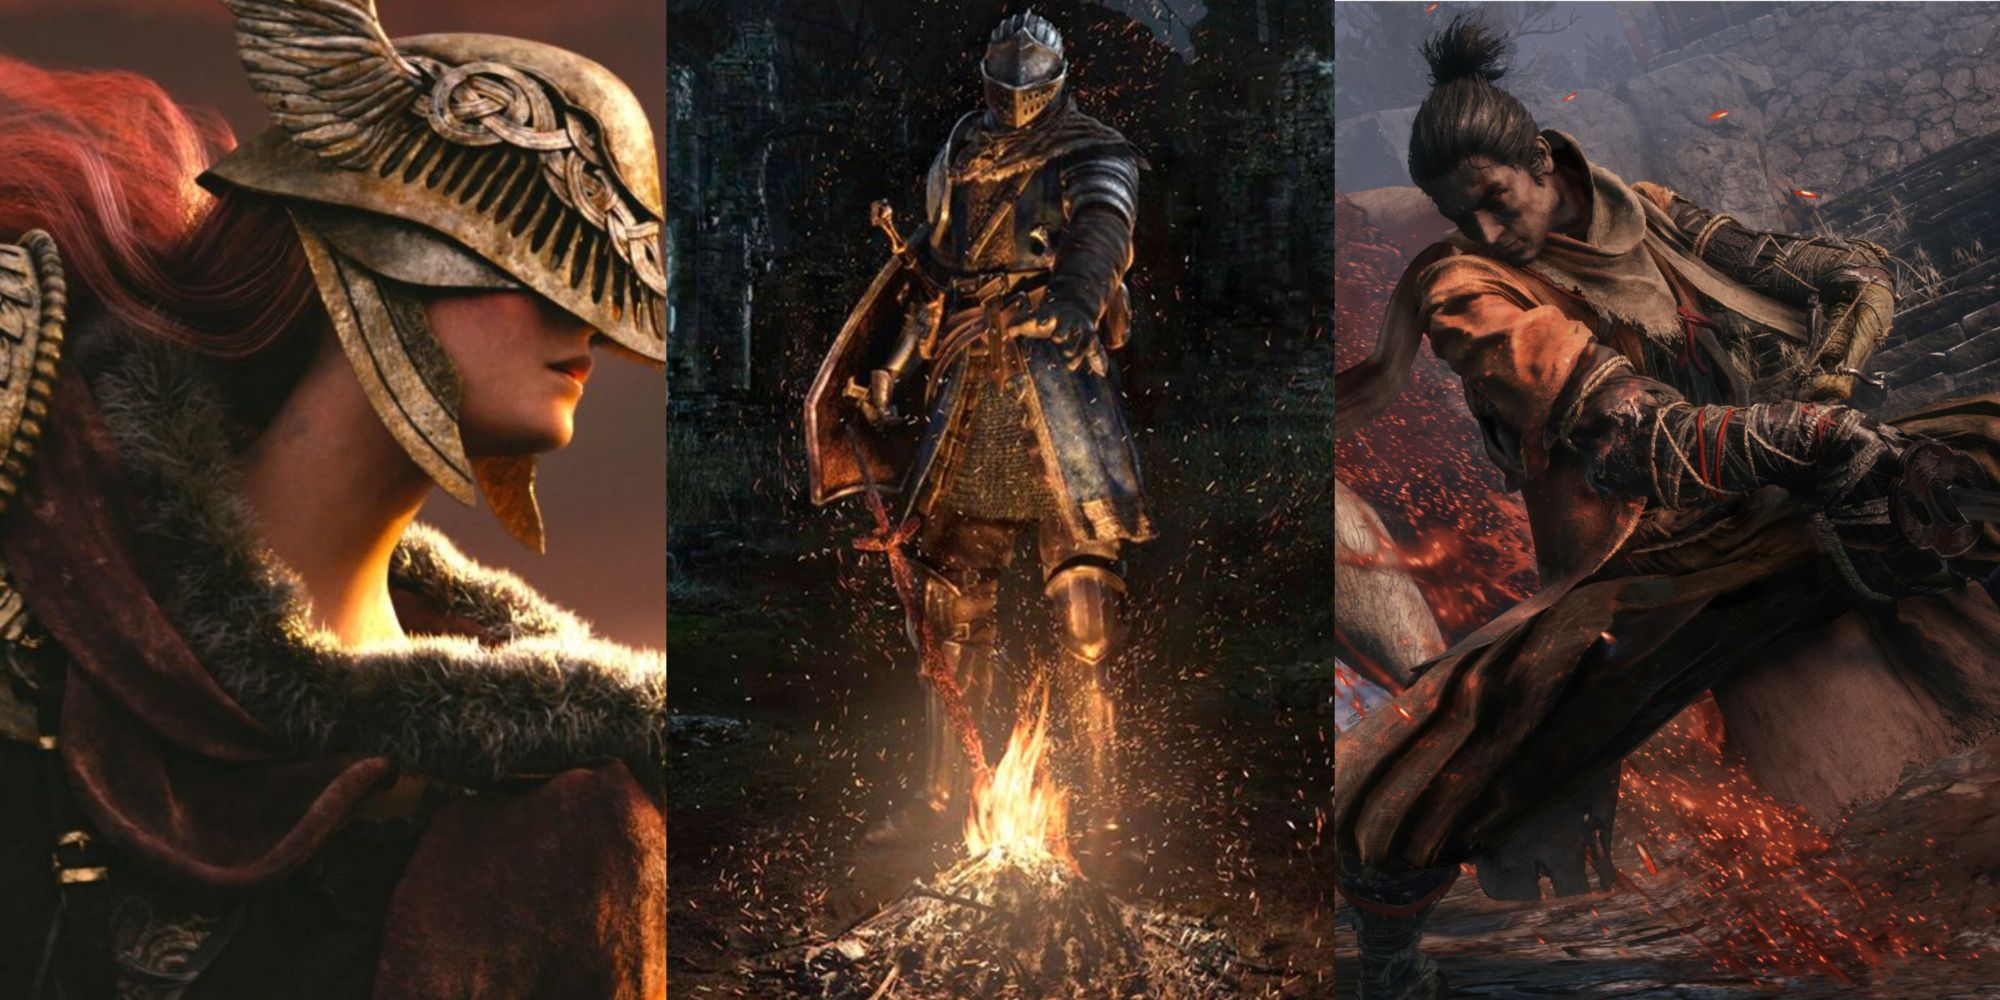 First time souls player difficulty tier list (controversial) : r/darksouls3